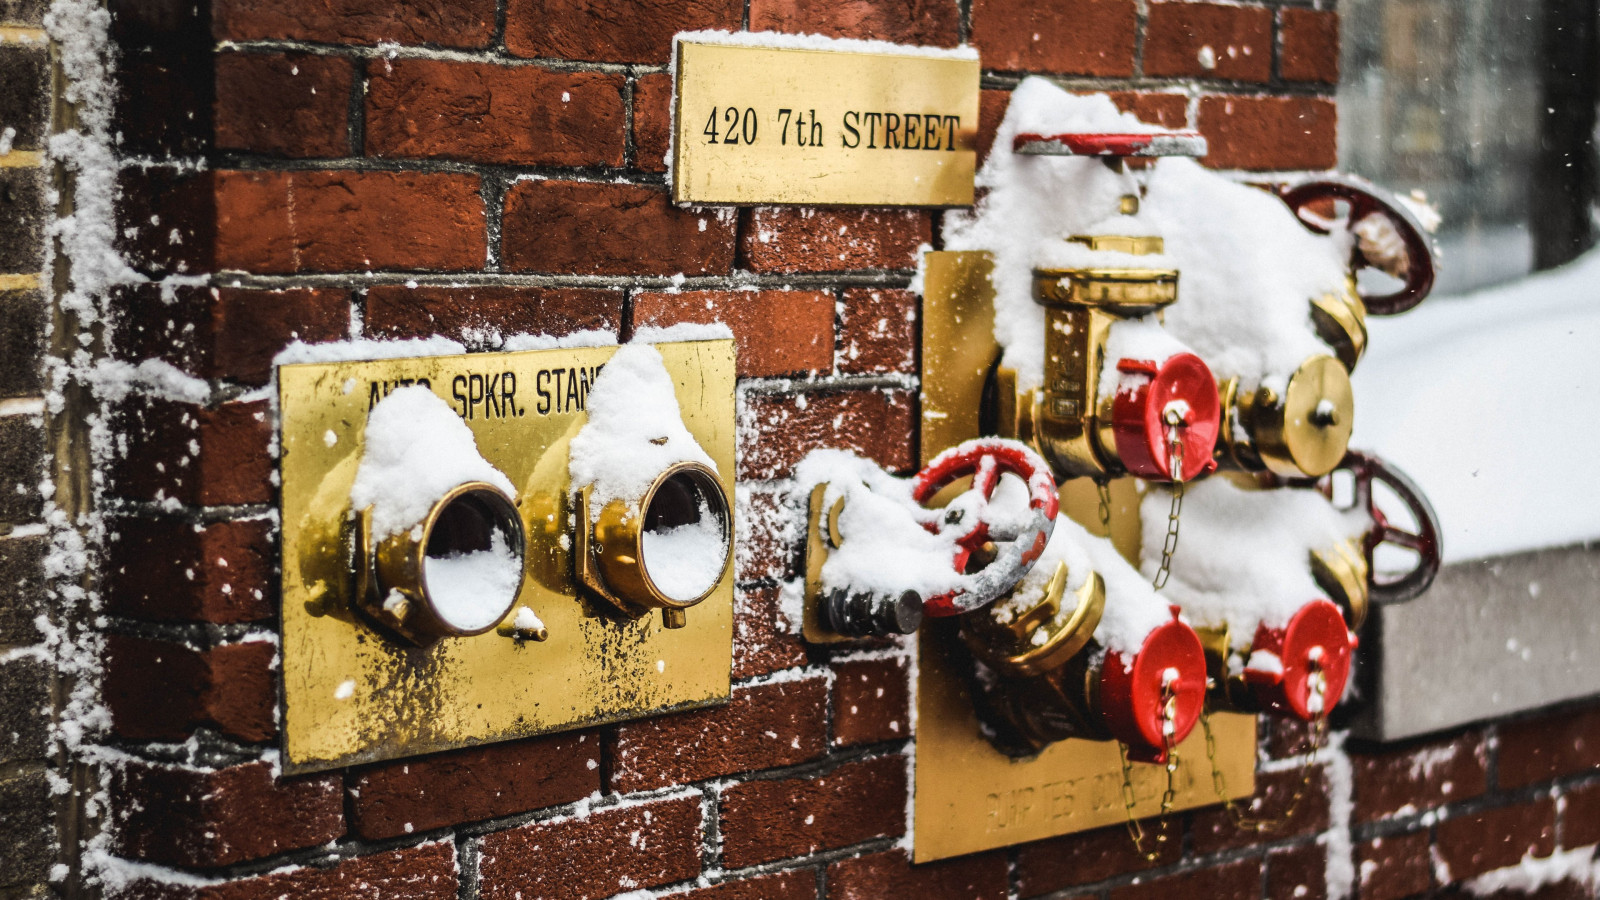 Snow covered fire standpipes in Washington wallpaper 1600x900